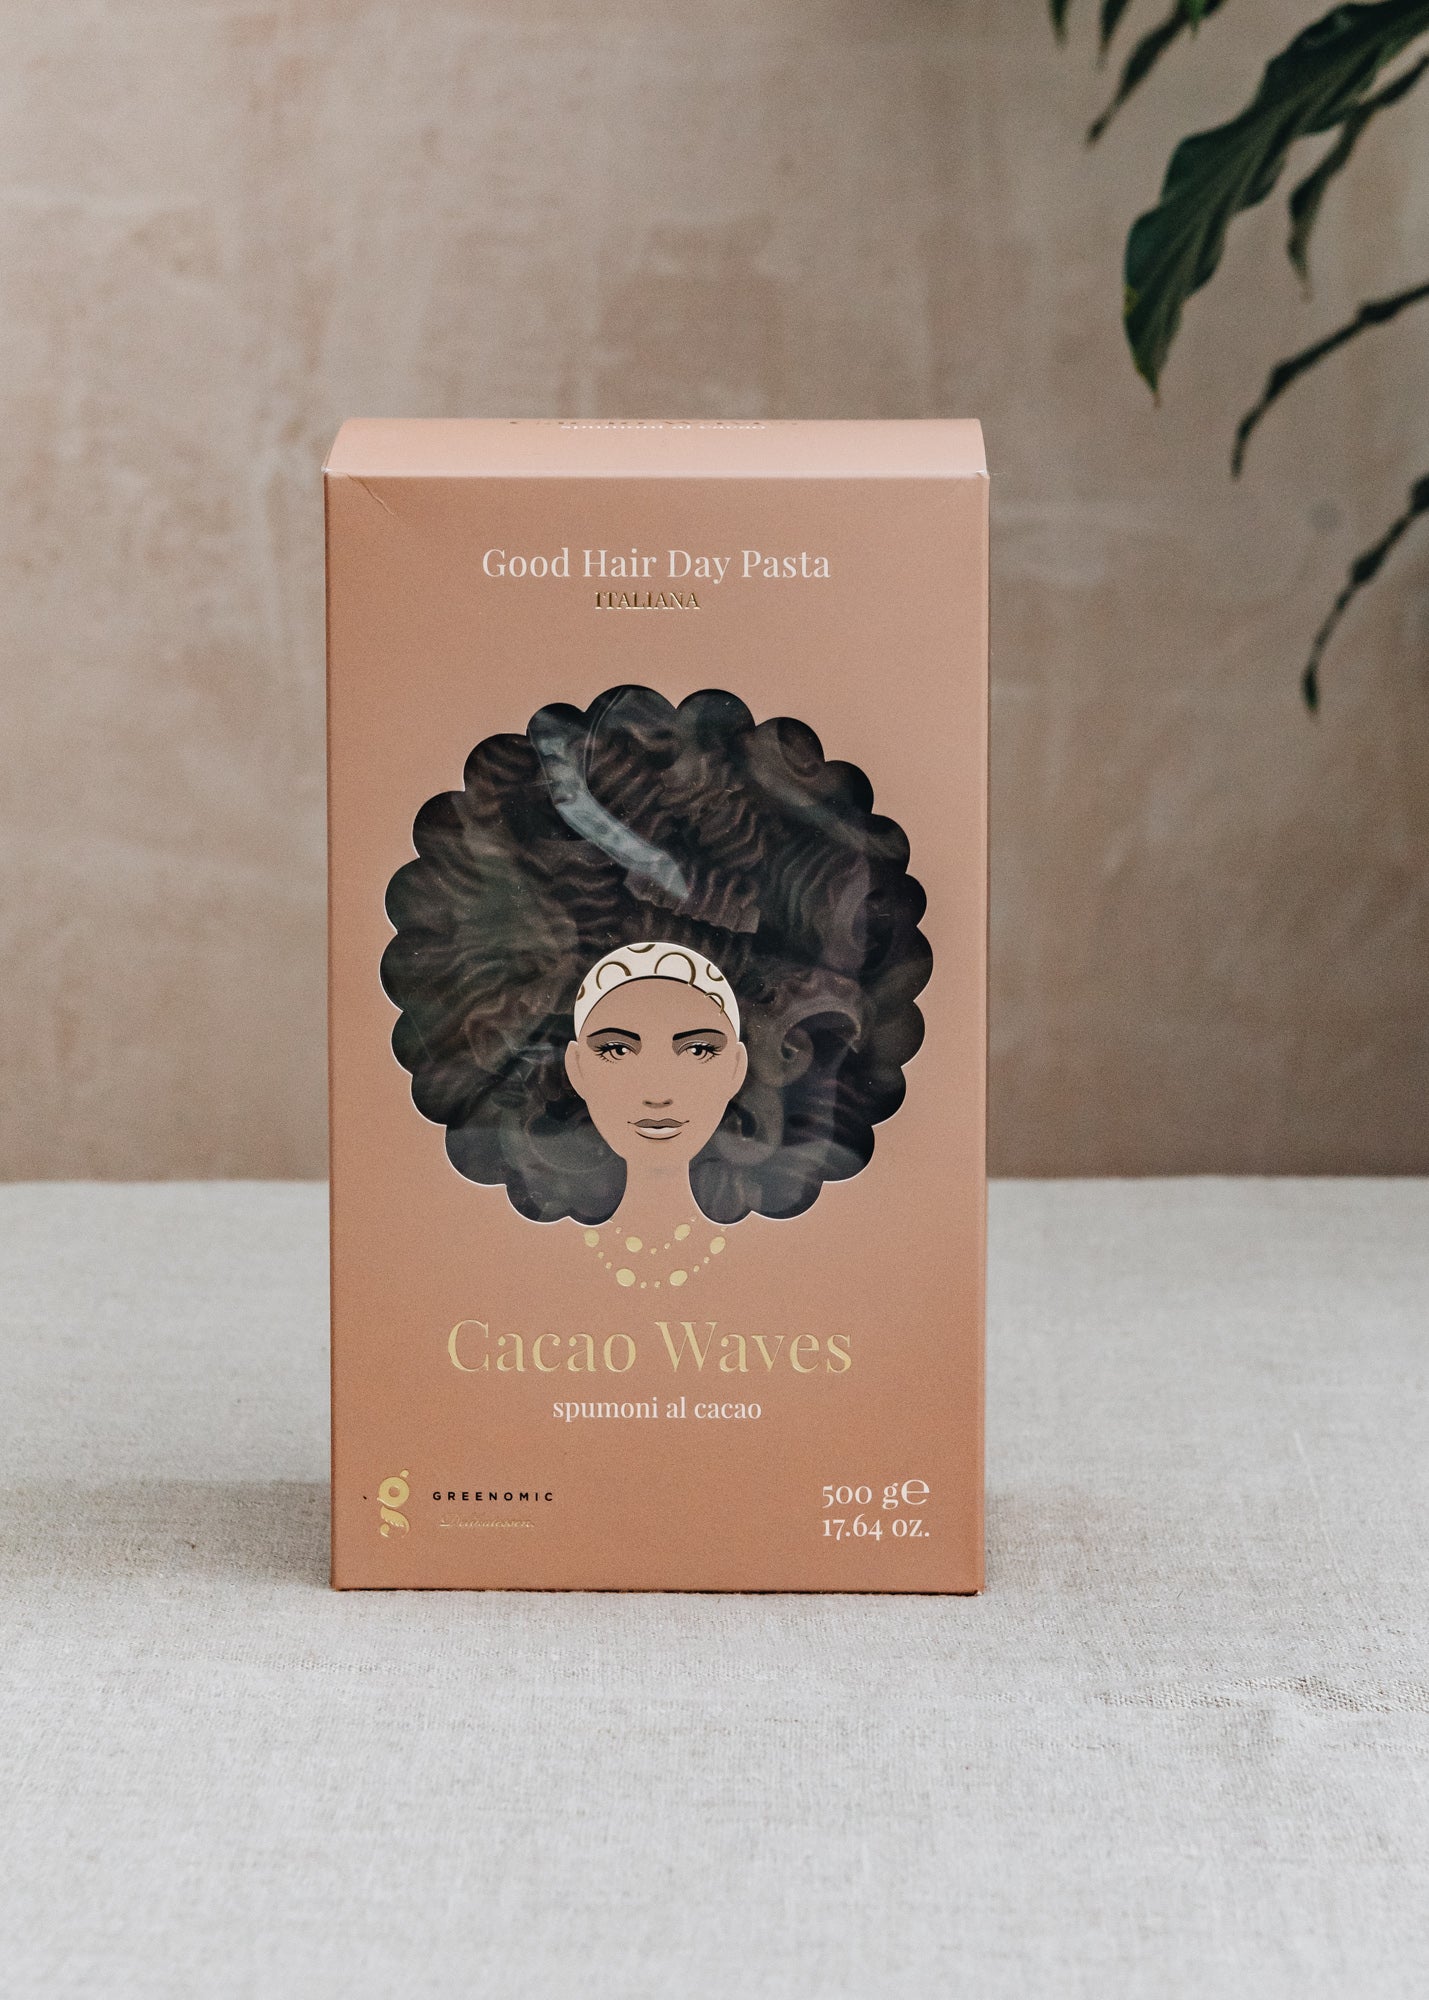 Good Hair Day Pasta Cacao Waves